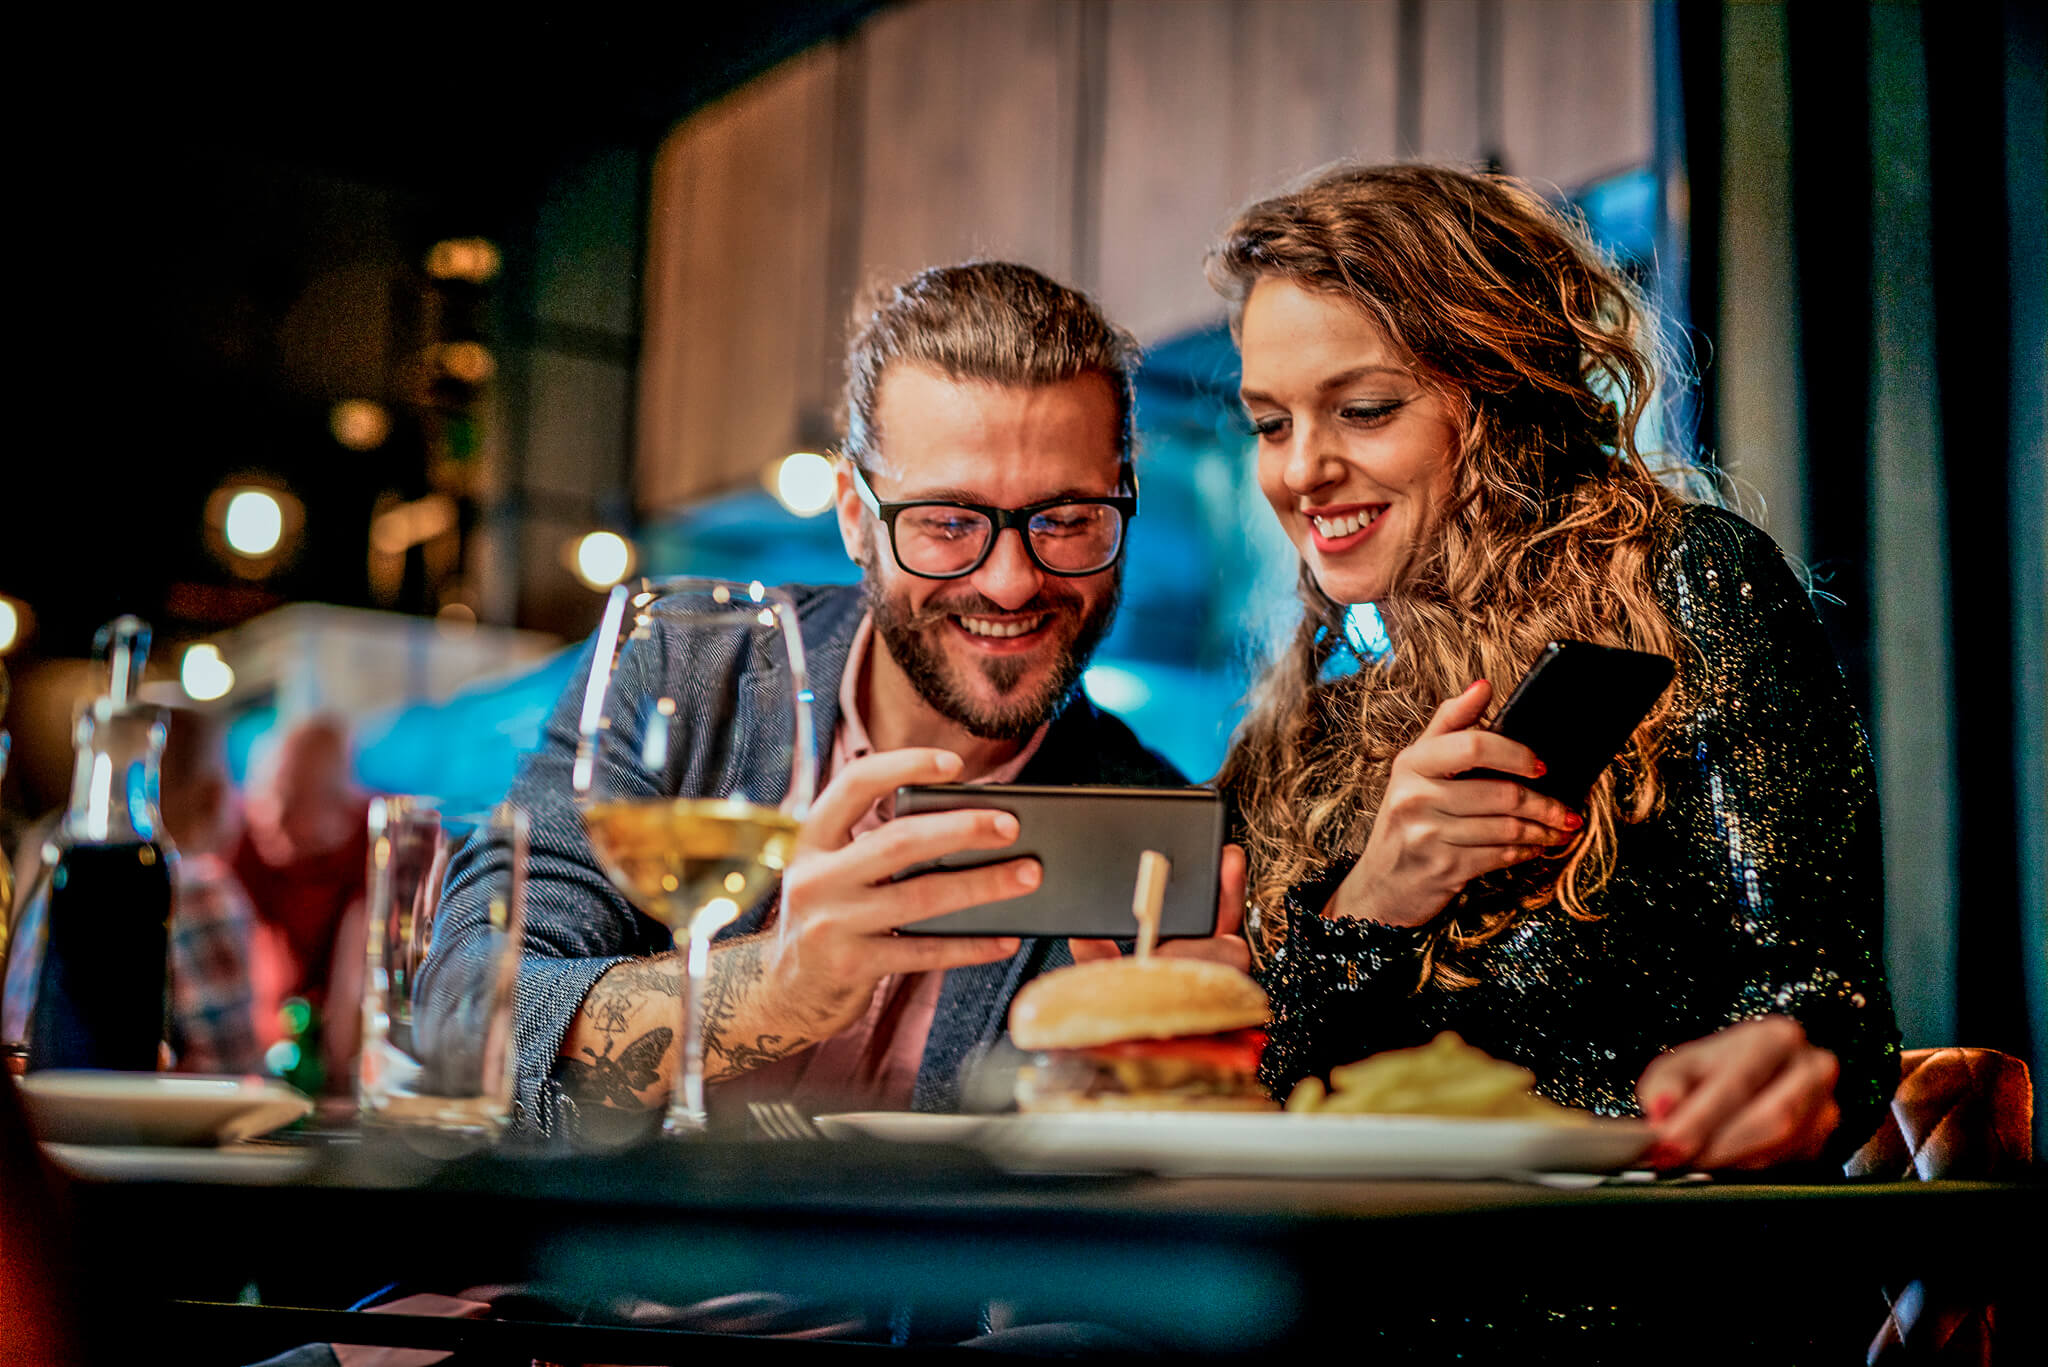 Young couple sitting in a restaurant with smartphones - important for restaurants with regards to IoT